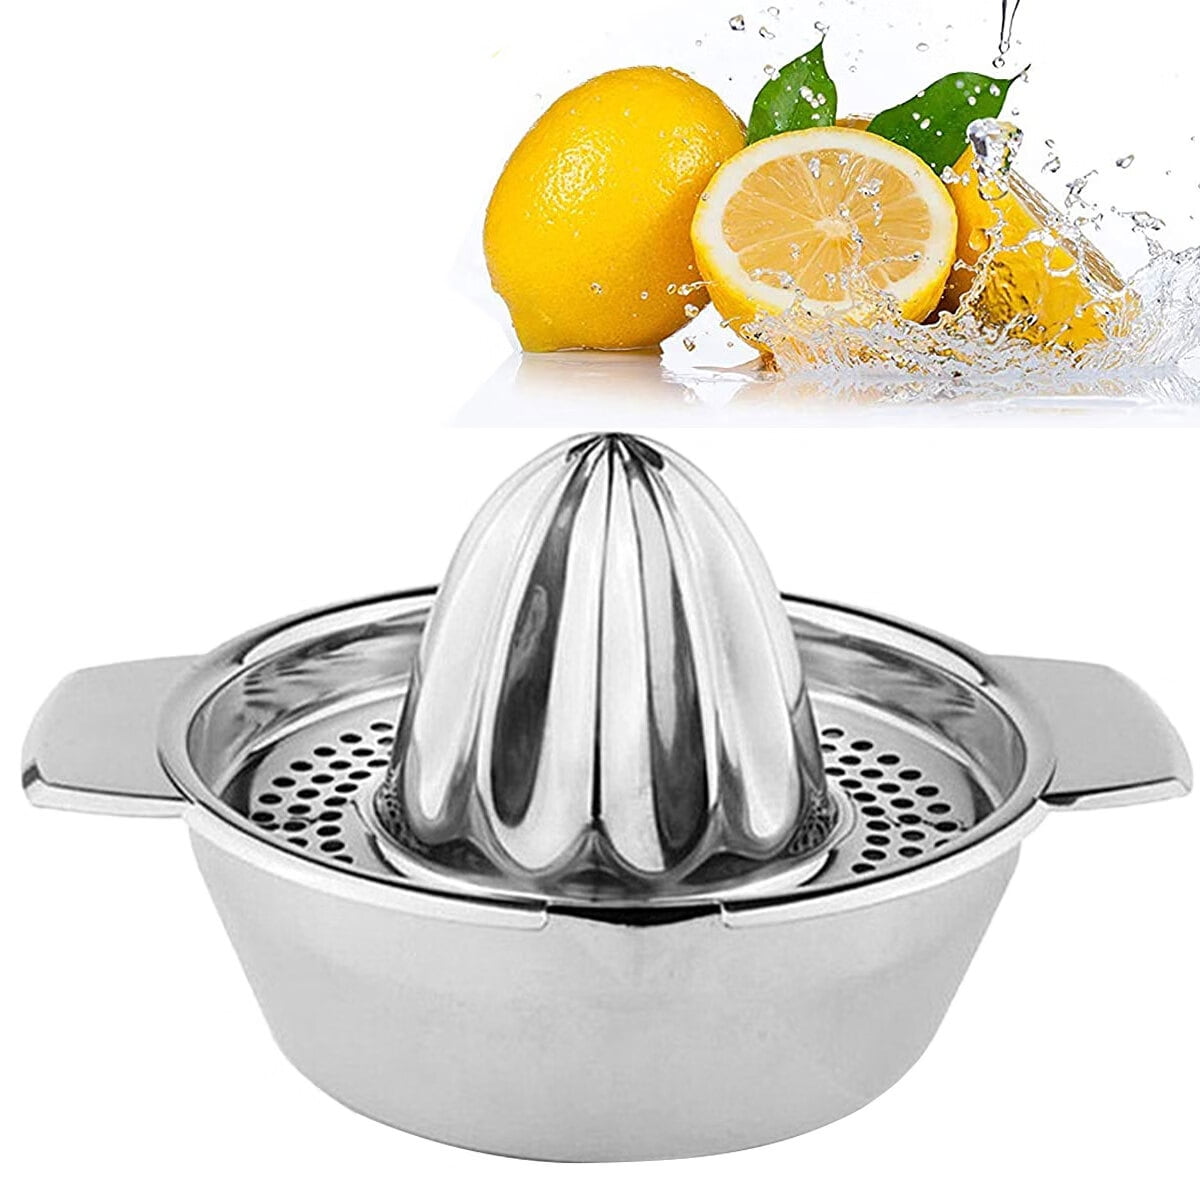  IFFMYJB Lemon Squeezer, Citrus Lemon Orange Juicer Squeezer,  Manual Hand Juicer for Orange Lime Squeezer, Lemon Juicer Orange Juicer  Squeezer with Strainer and Built-in Measuring Cup, Easy To Use: Home 